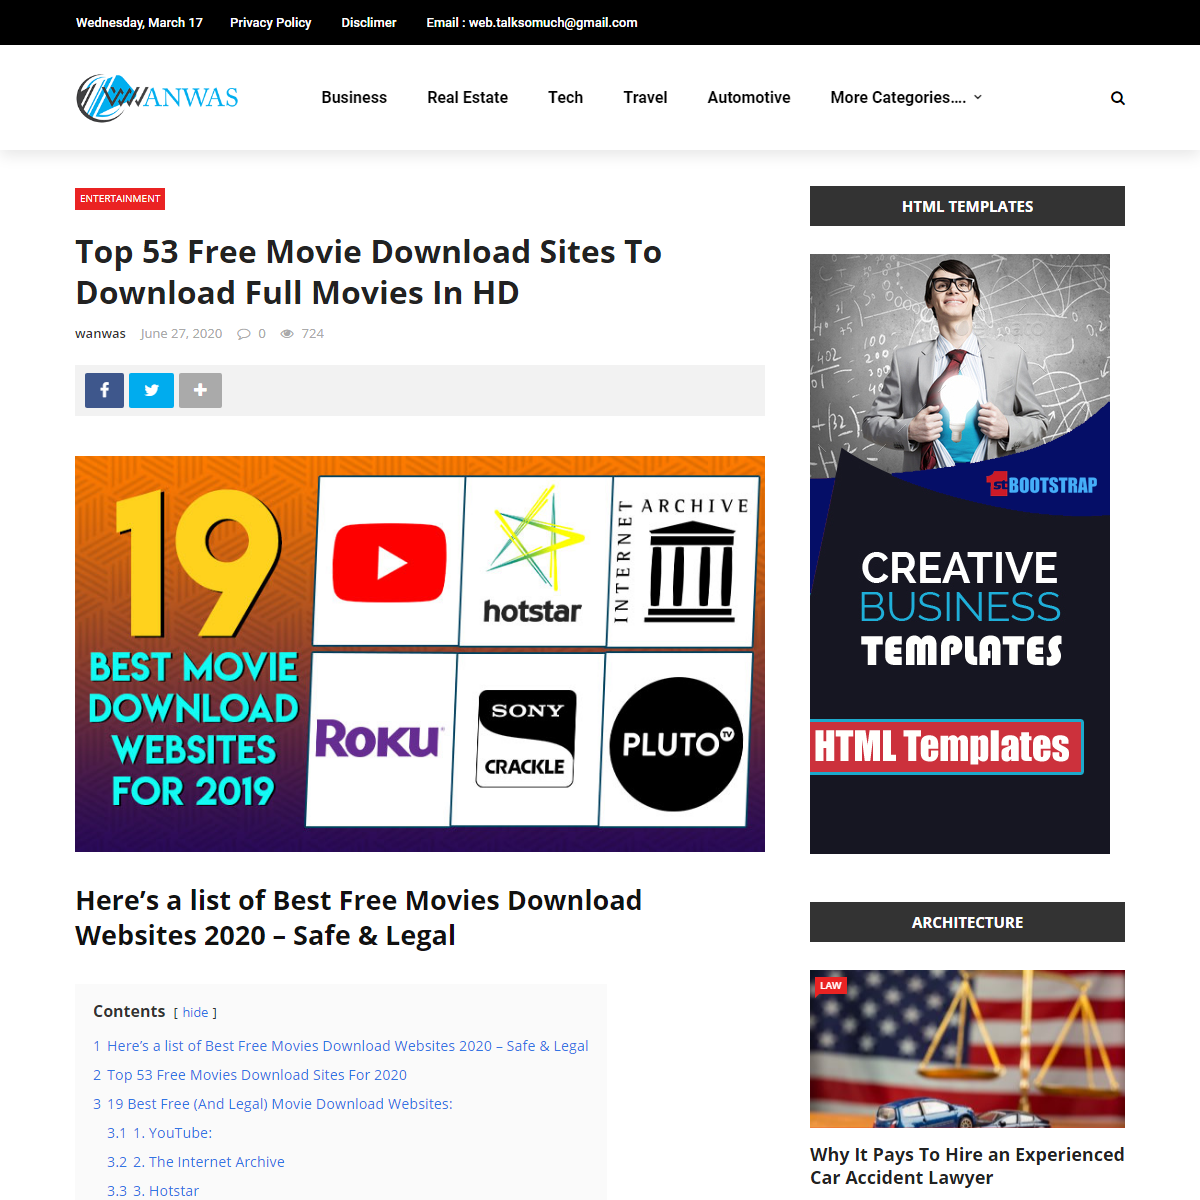 A complete backup of https://www.wanwas.com/top-free-movie-download-websites-list/